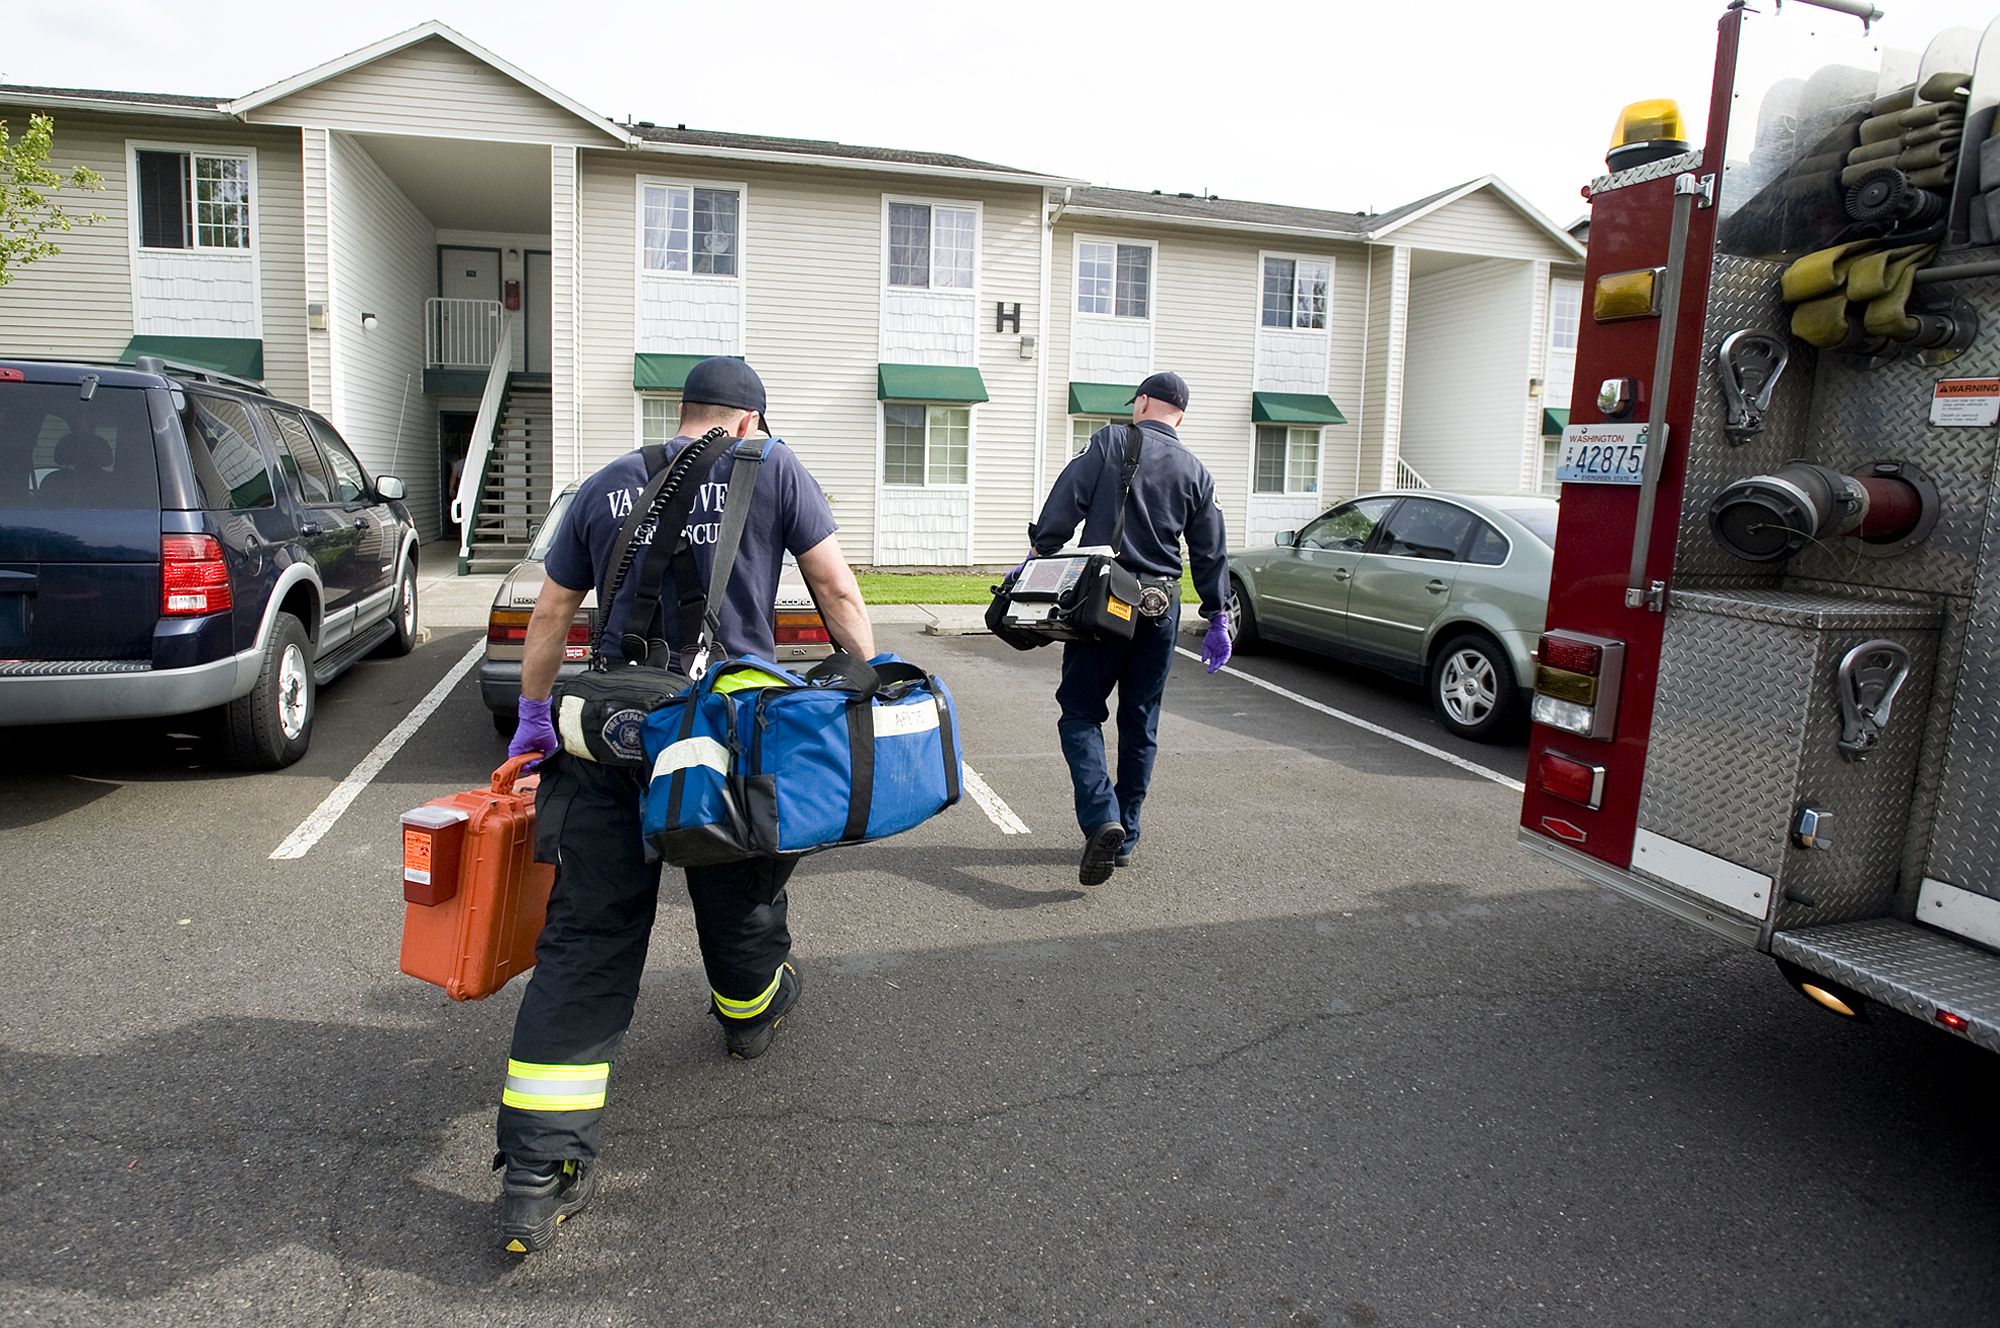 Vancouver Fire Department firefighters Pete Adams, left, and Eric Becker, from Fire Station 3 respond to a medical call near General Anderson Road.